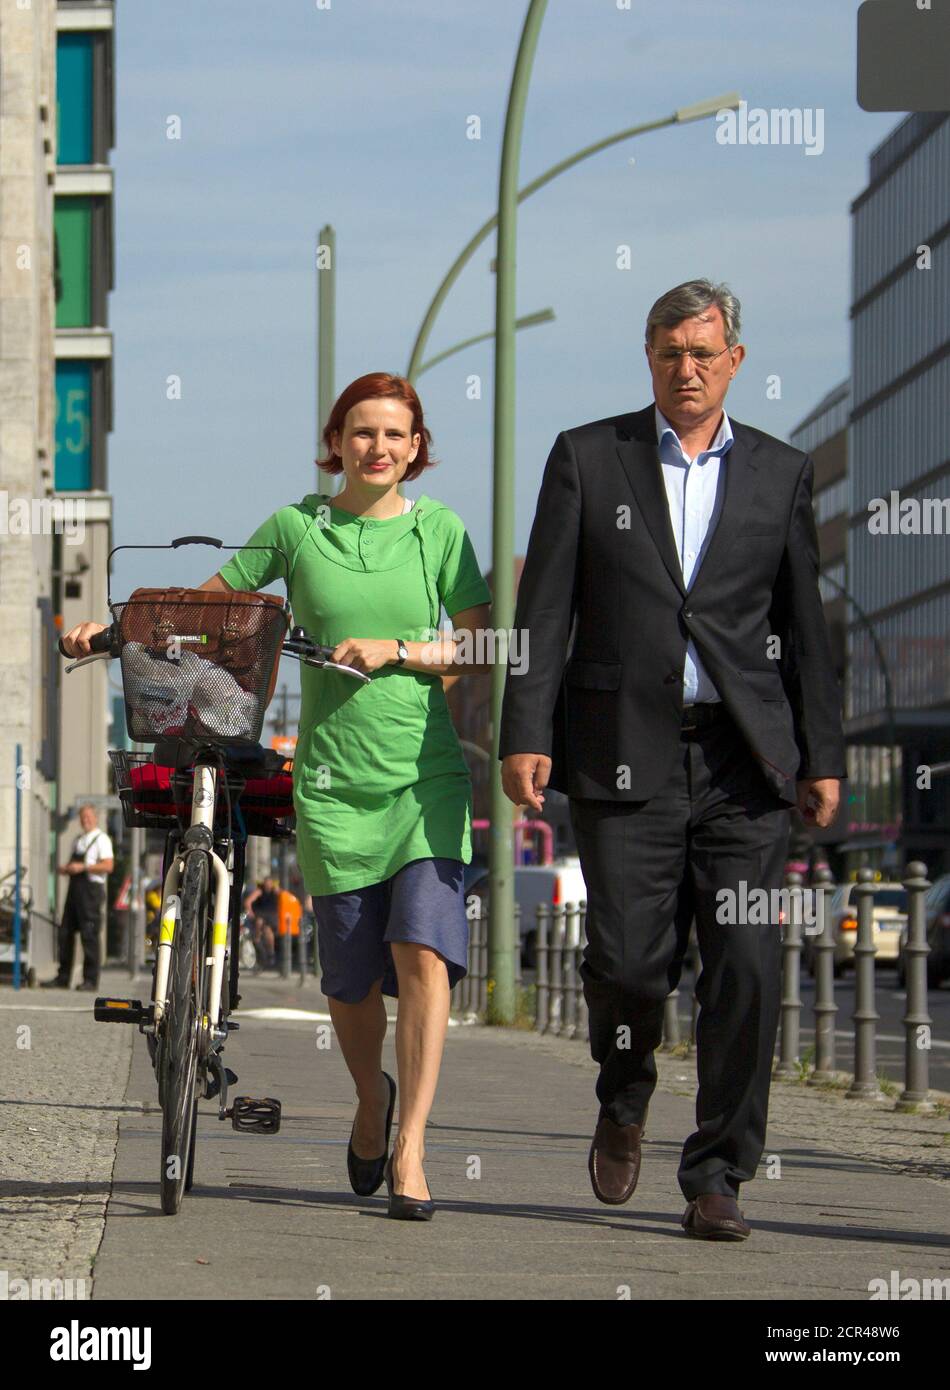 The leaders of the left-wing Die Linke party Katja Kipping (L) and Bernd Riexinger arrive at the finance ministry to meet the media in Berlin, August 16, 2012.  REUTERS/Thomas Peter (GERMANY - Tags: POLITICS BUSINESS) Stock Photo